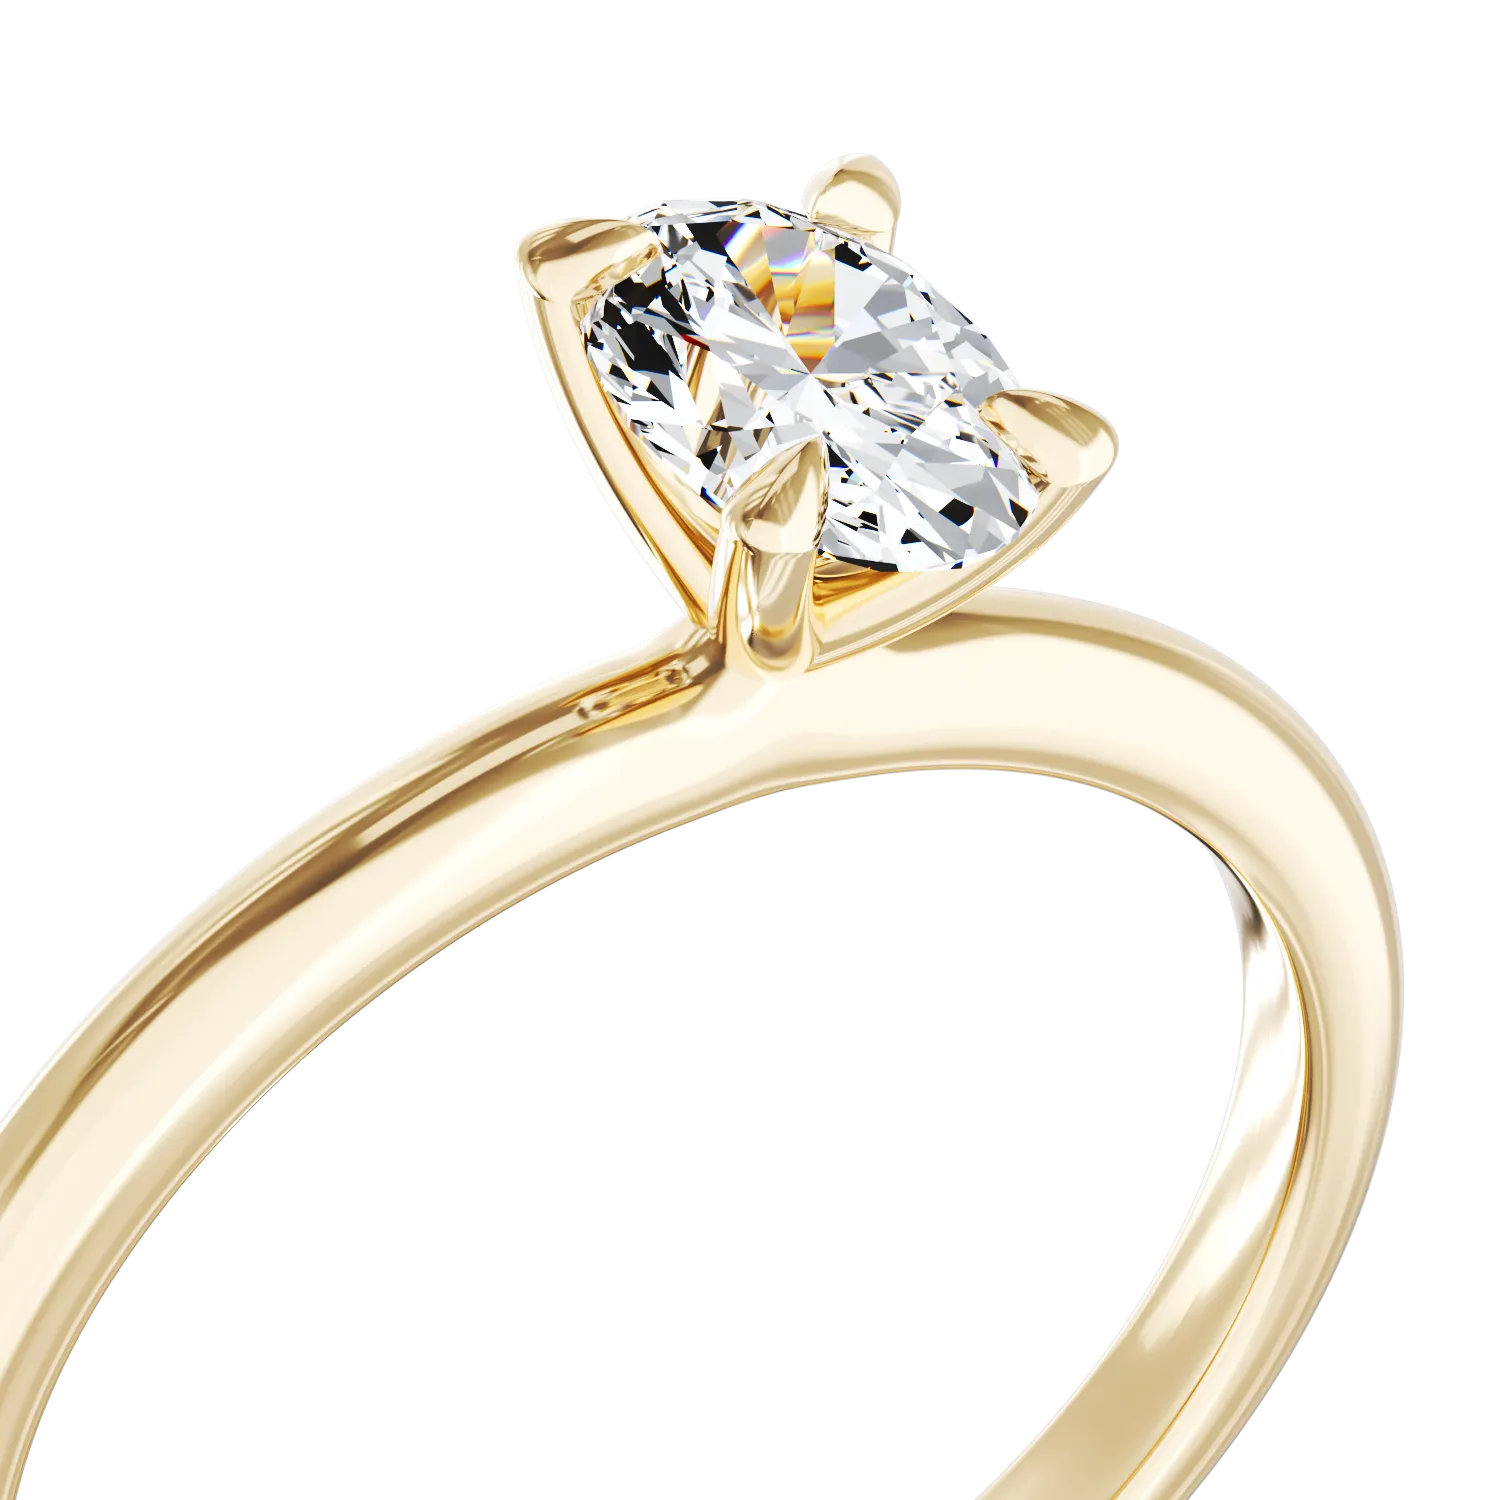 18K yellow gold engagement ring with 0.4ct solitaire diamond